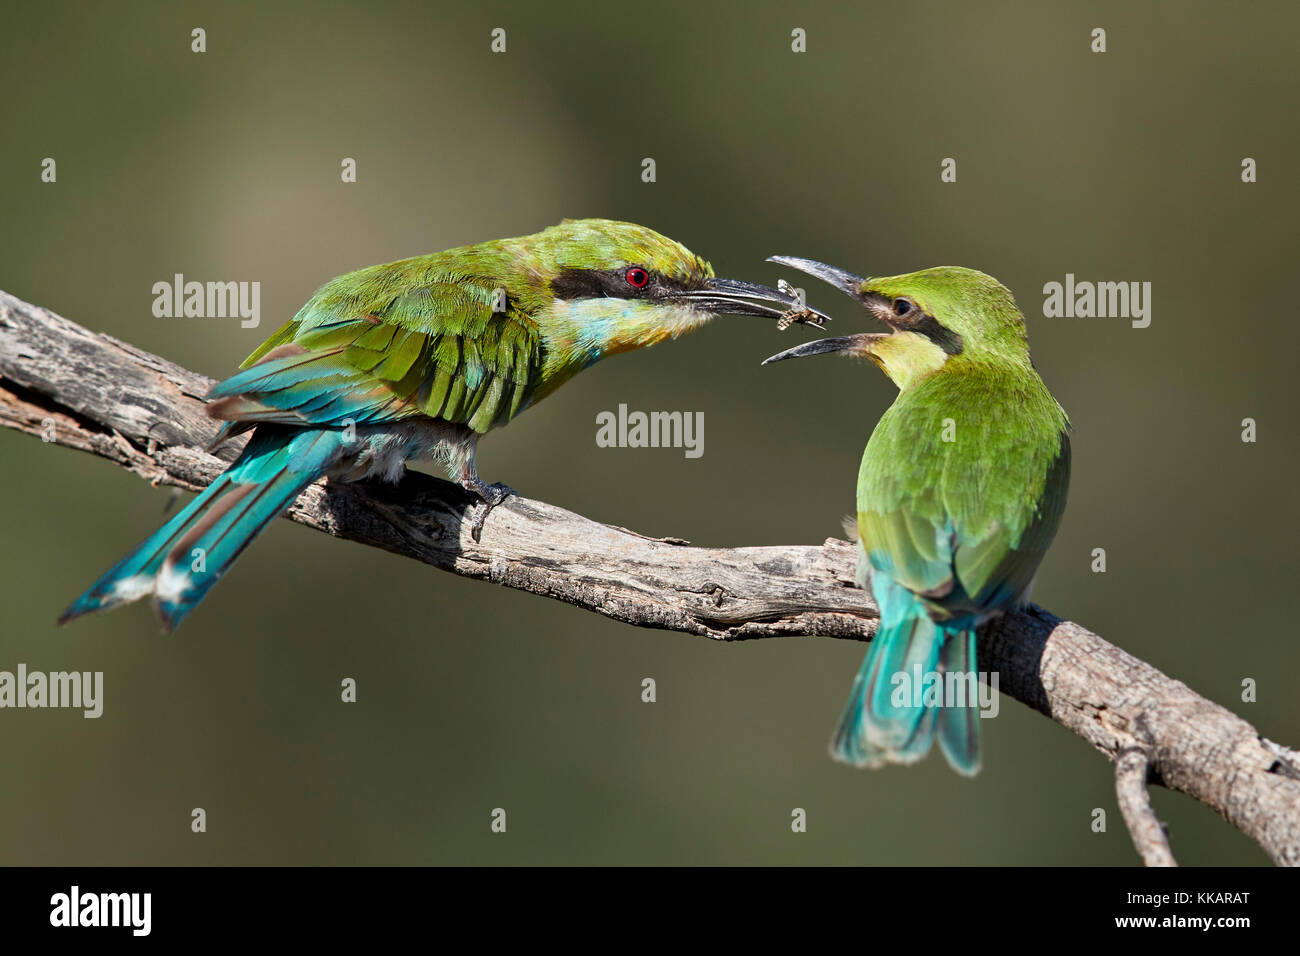 Swallow-tailed bee-eater (Merops hirundineus) adult feeding young, Kgalagadi Transfrontier Park, South Africa, Africa Stock Photo